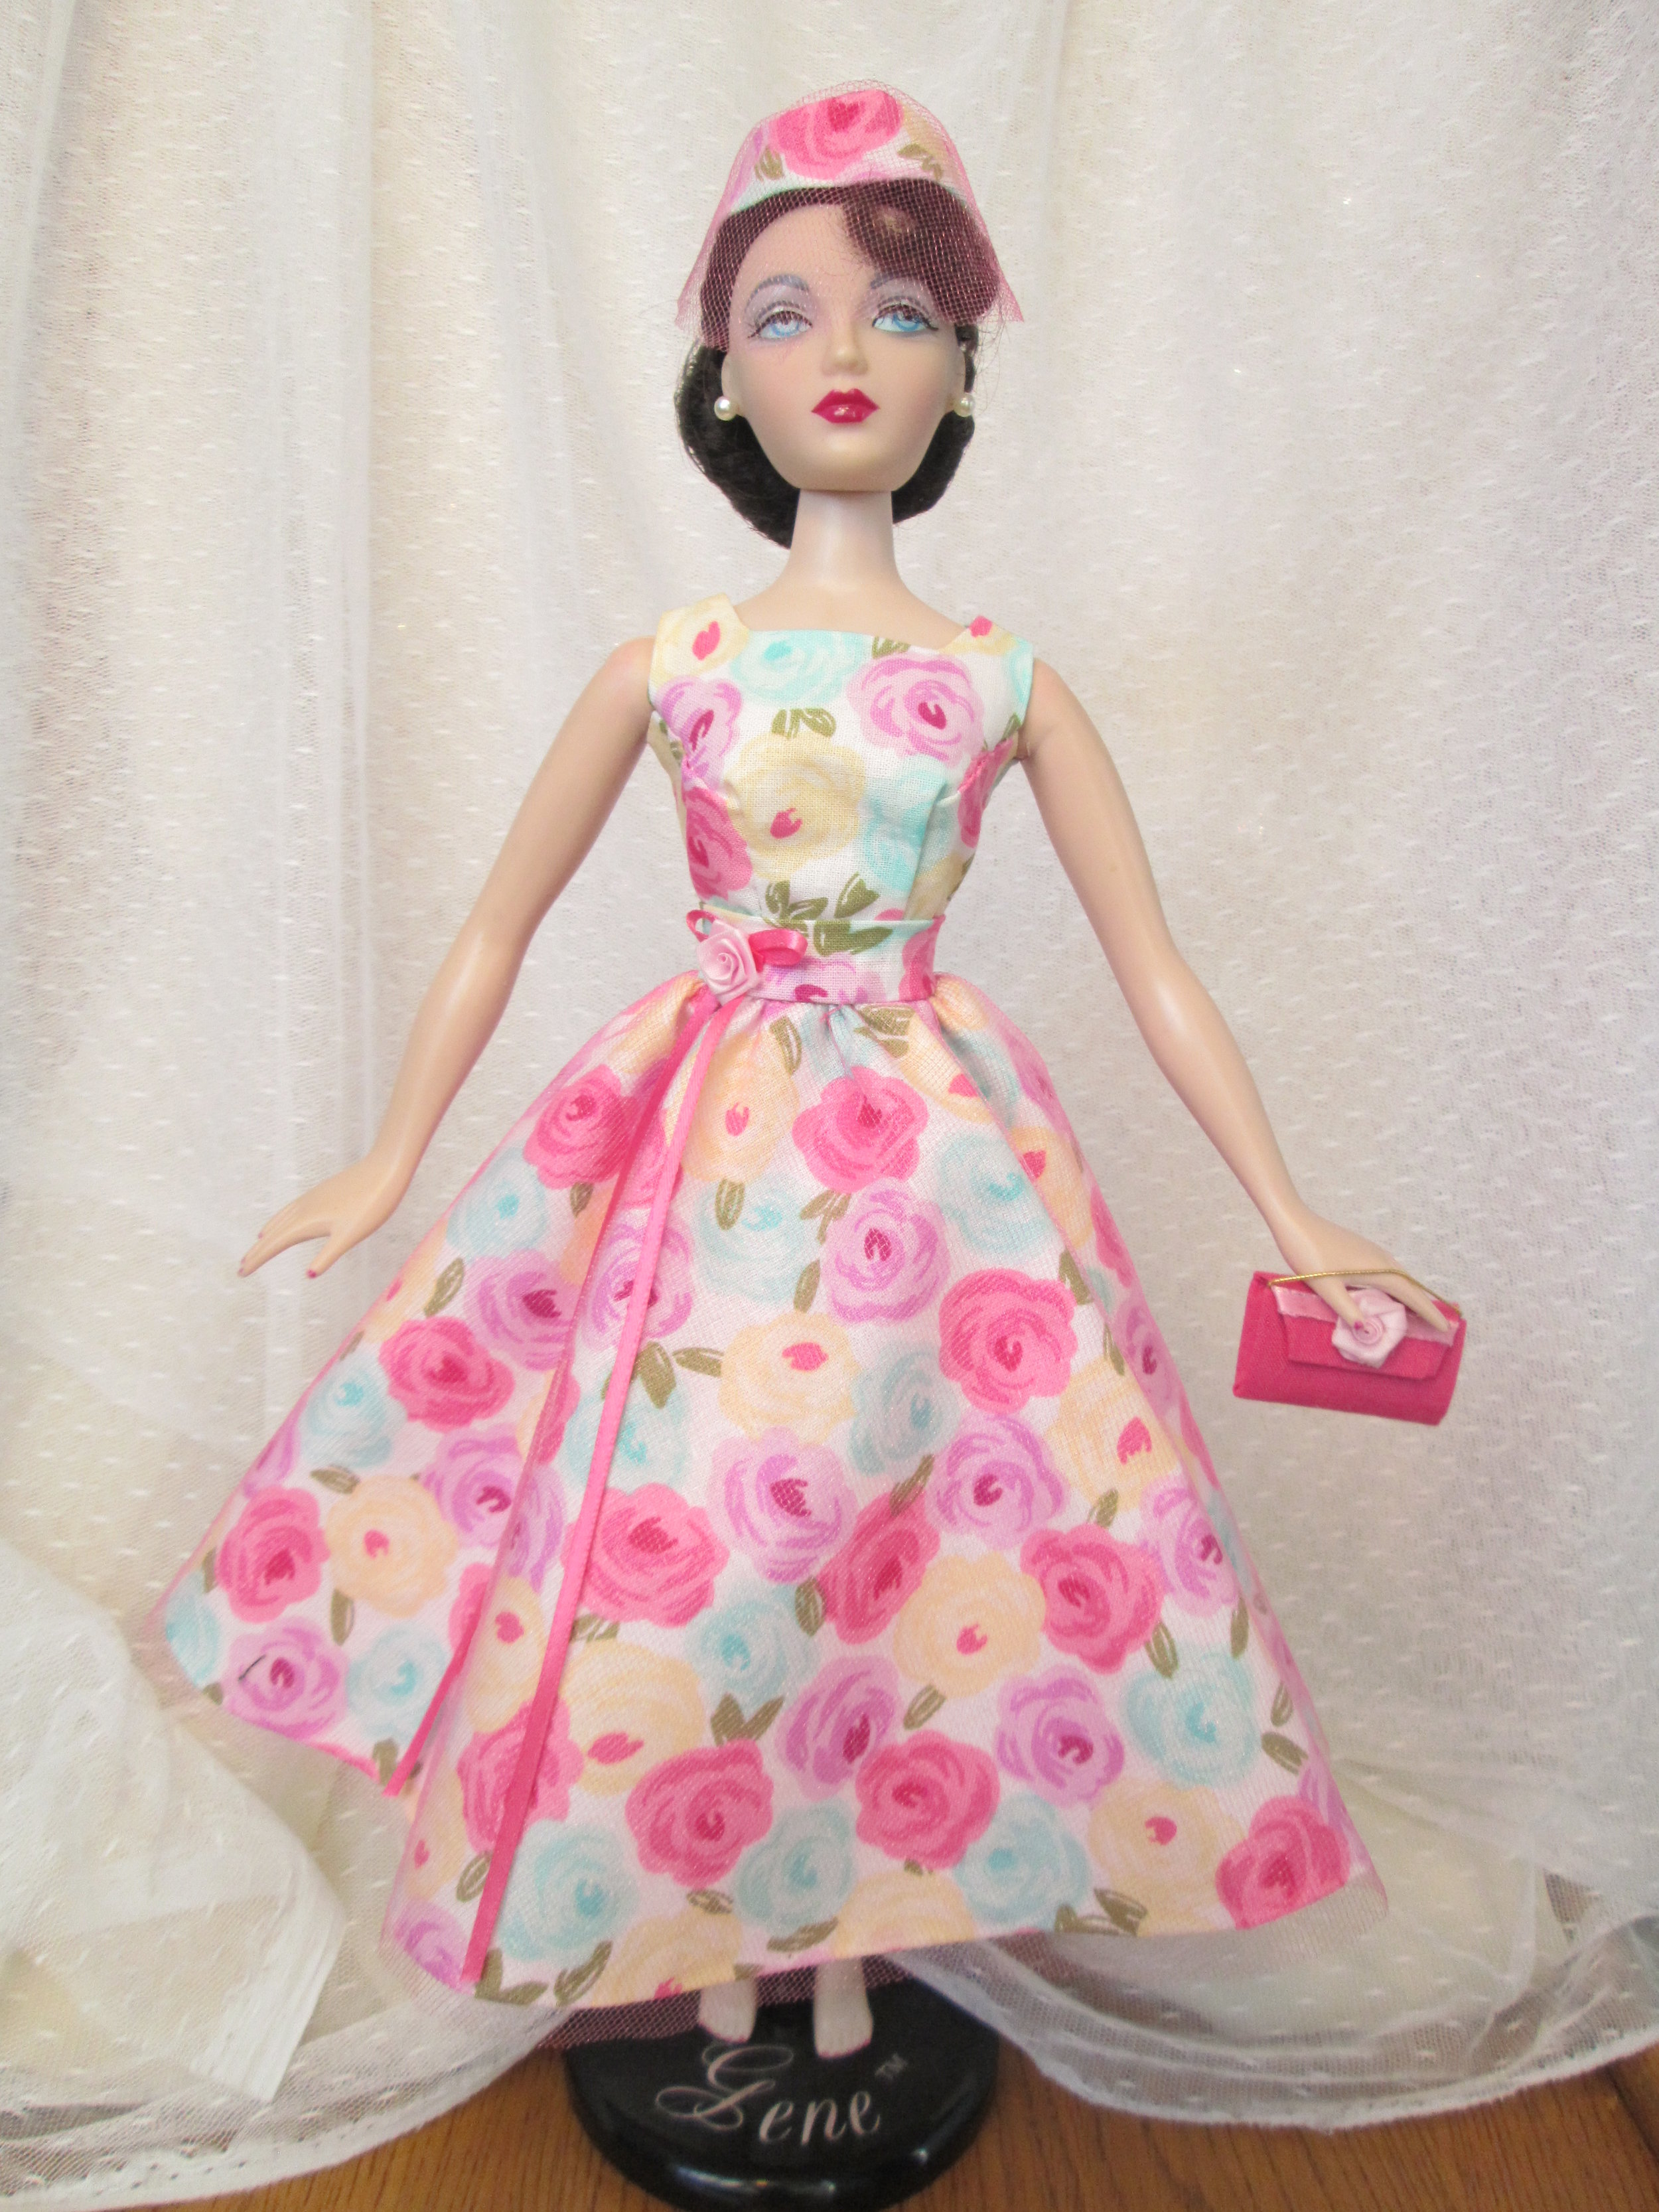 Handmade Gene Doll Dresses and Accessories by JMB Designs